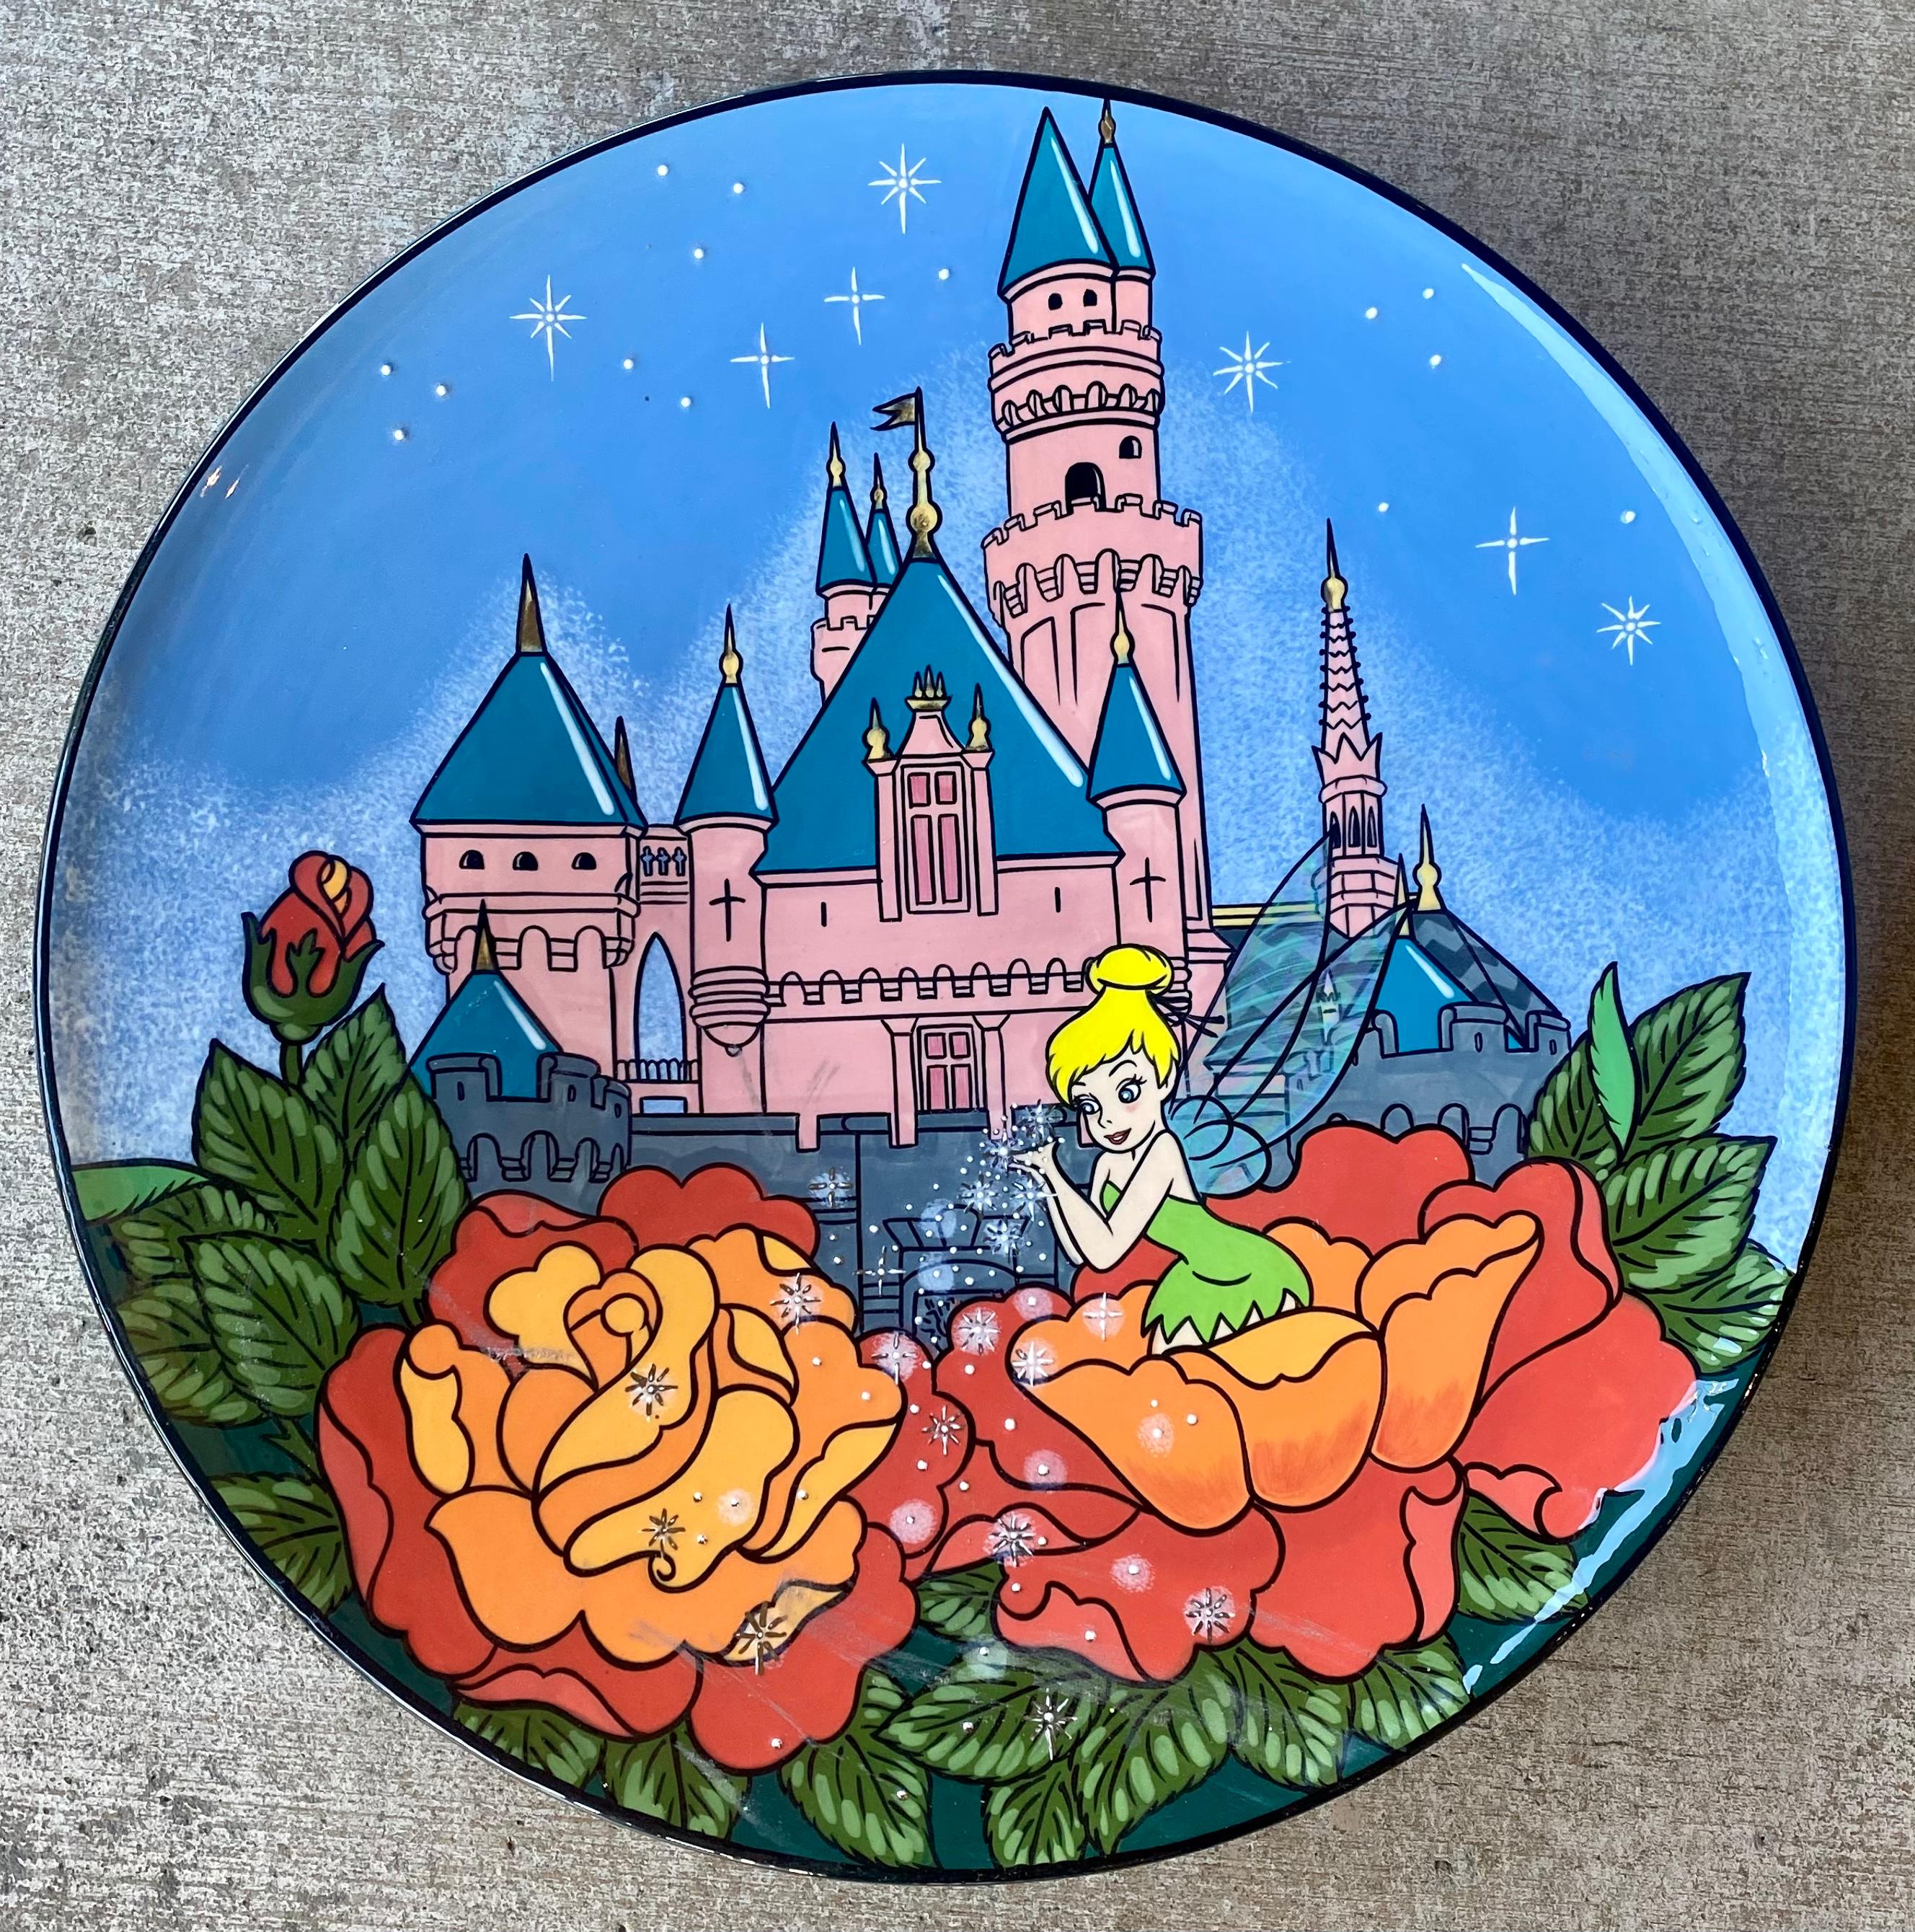 Collectible large, hand made tinker bell and the Disneyland Magic Kingdom castle original art plate by Disney artist, Elisabete Gomes. Ceramic plate features a vividly hand painted scene of the famous Magic Kingdom castle and tinker bell sitting